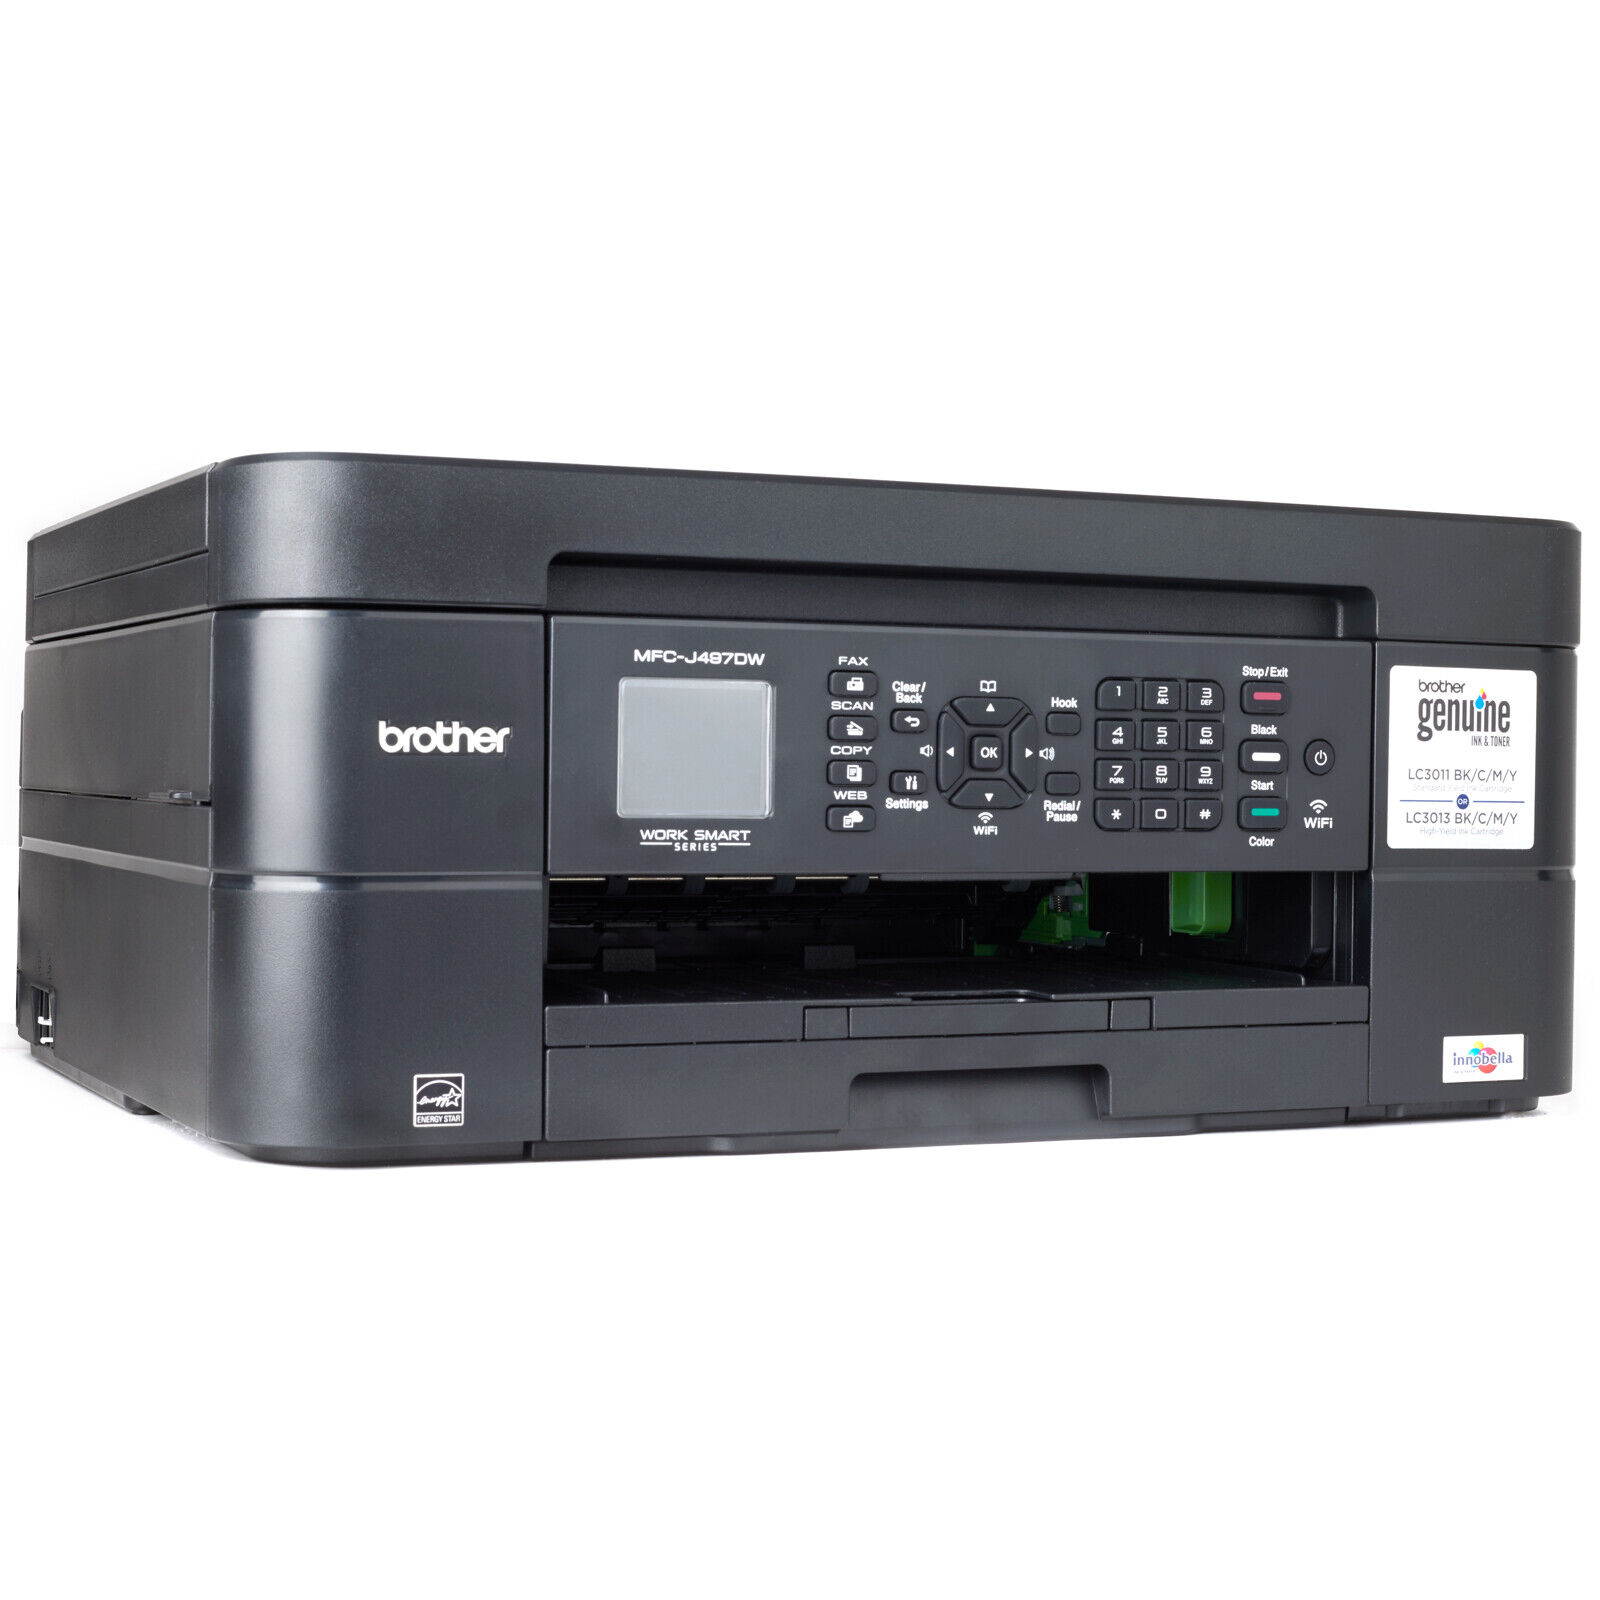 Brother MFC-J497DW Wireless All-In-One Inkjet Printer